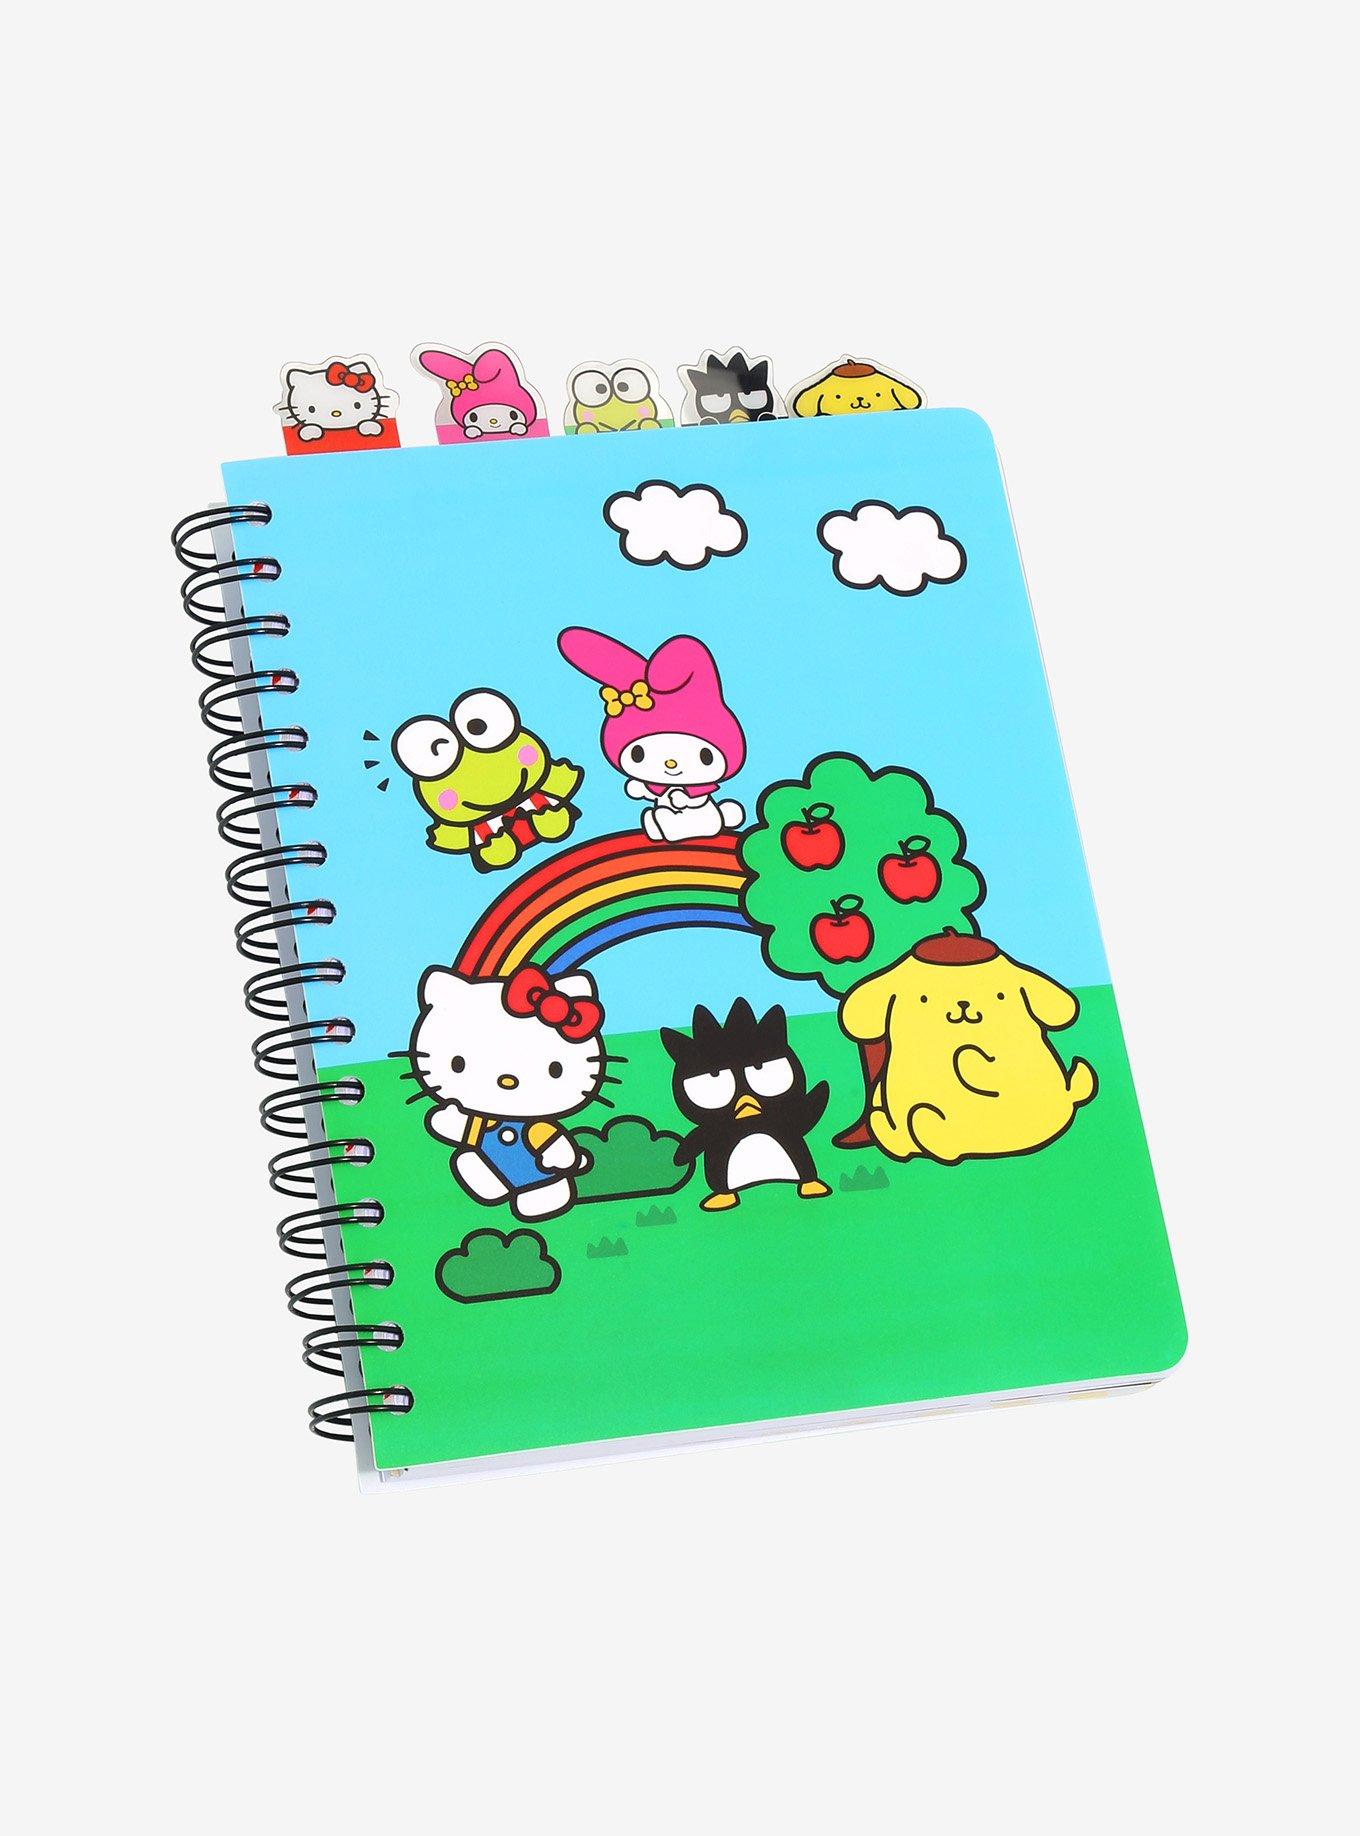 20 Hello Kitty and BFF Stickers, Kawaii Journaling Stickers, Sanrio Stickers